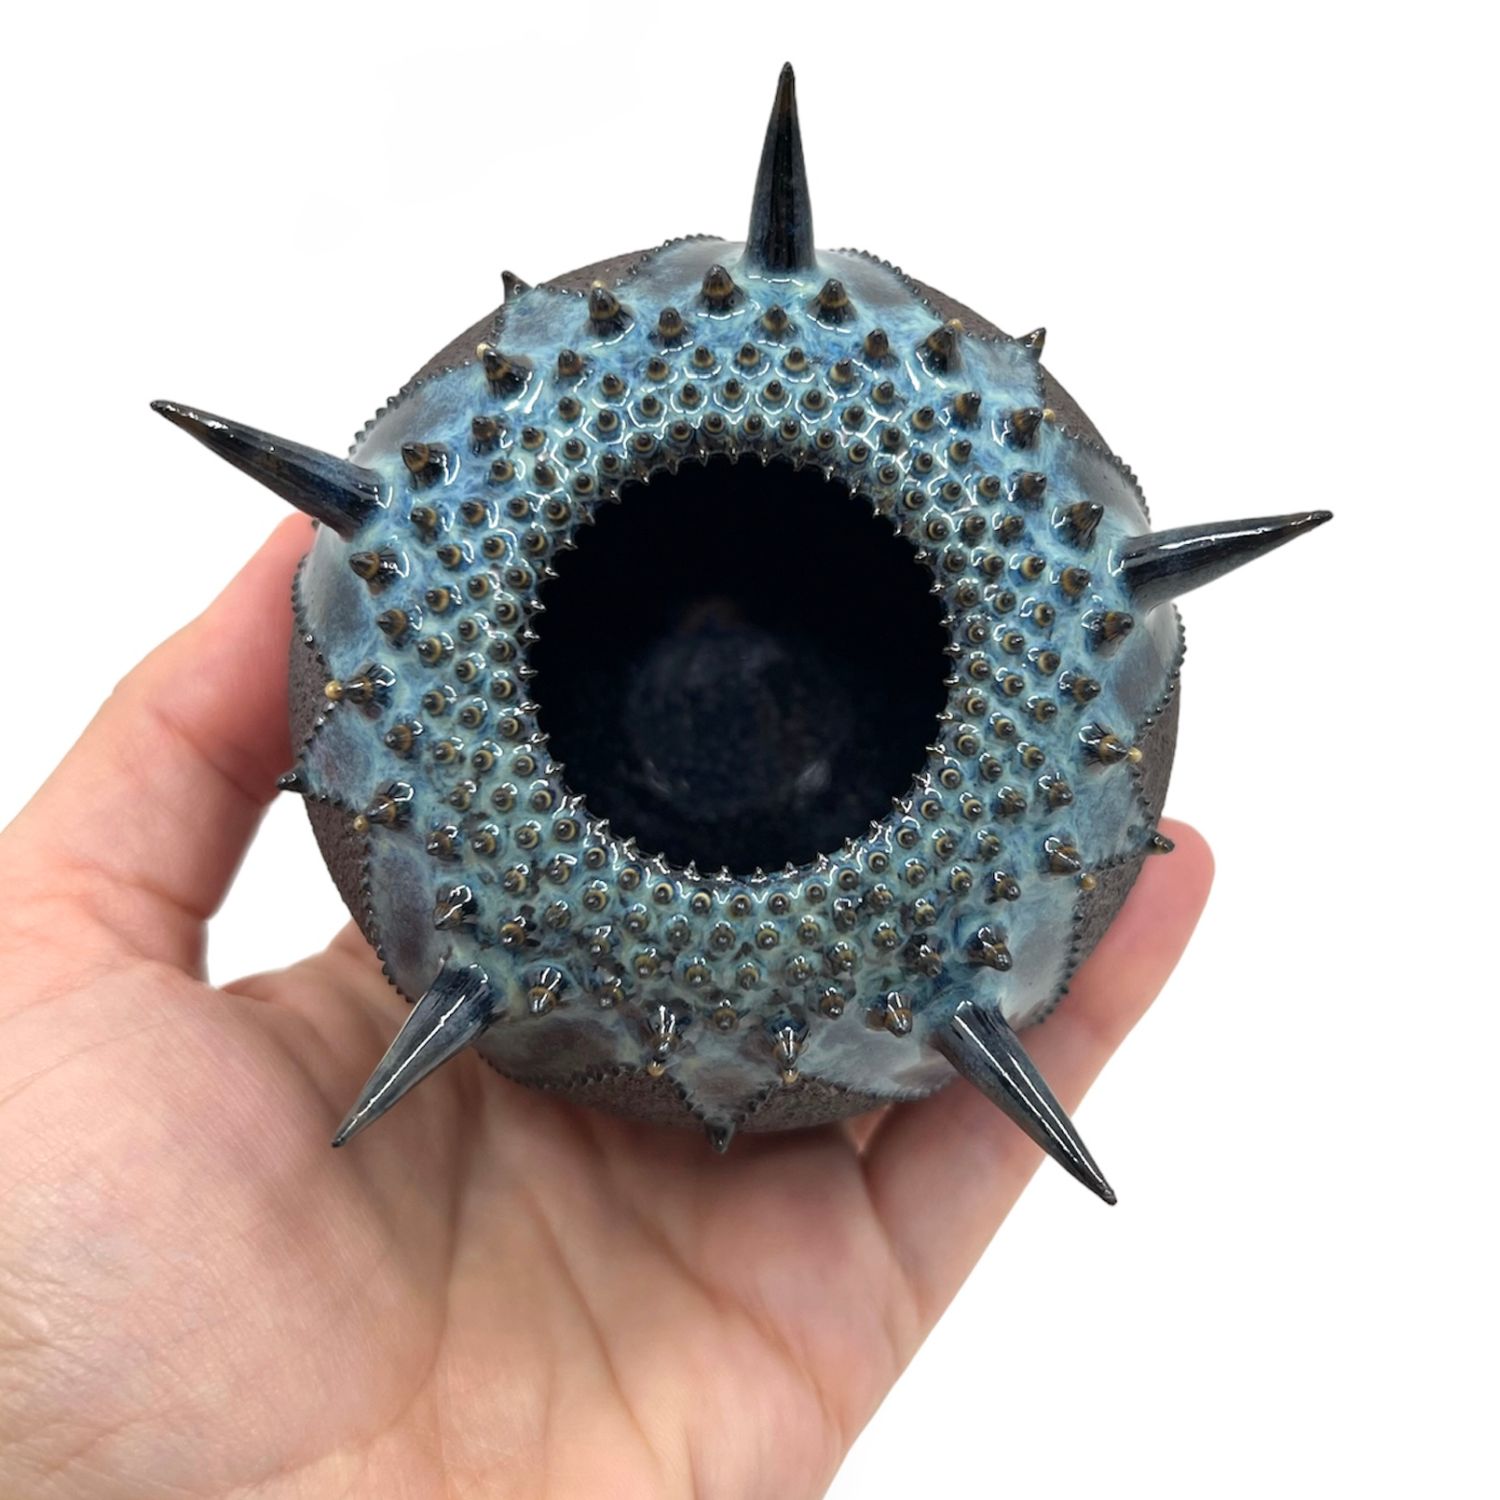 Zara Gardner: Black & Turquoise Urchin Sculpture with Spikes Product Image 4 of 4